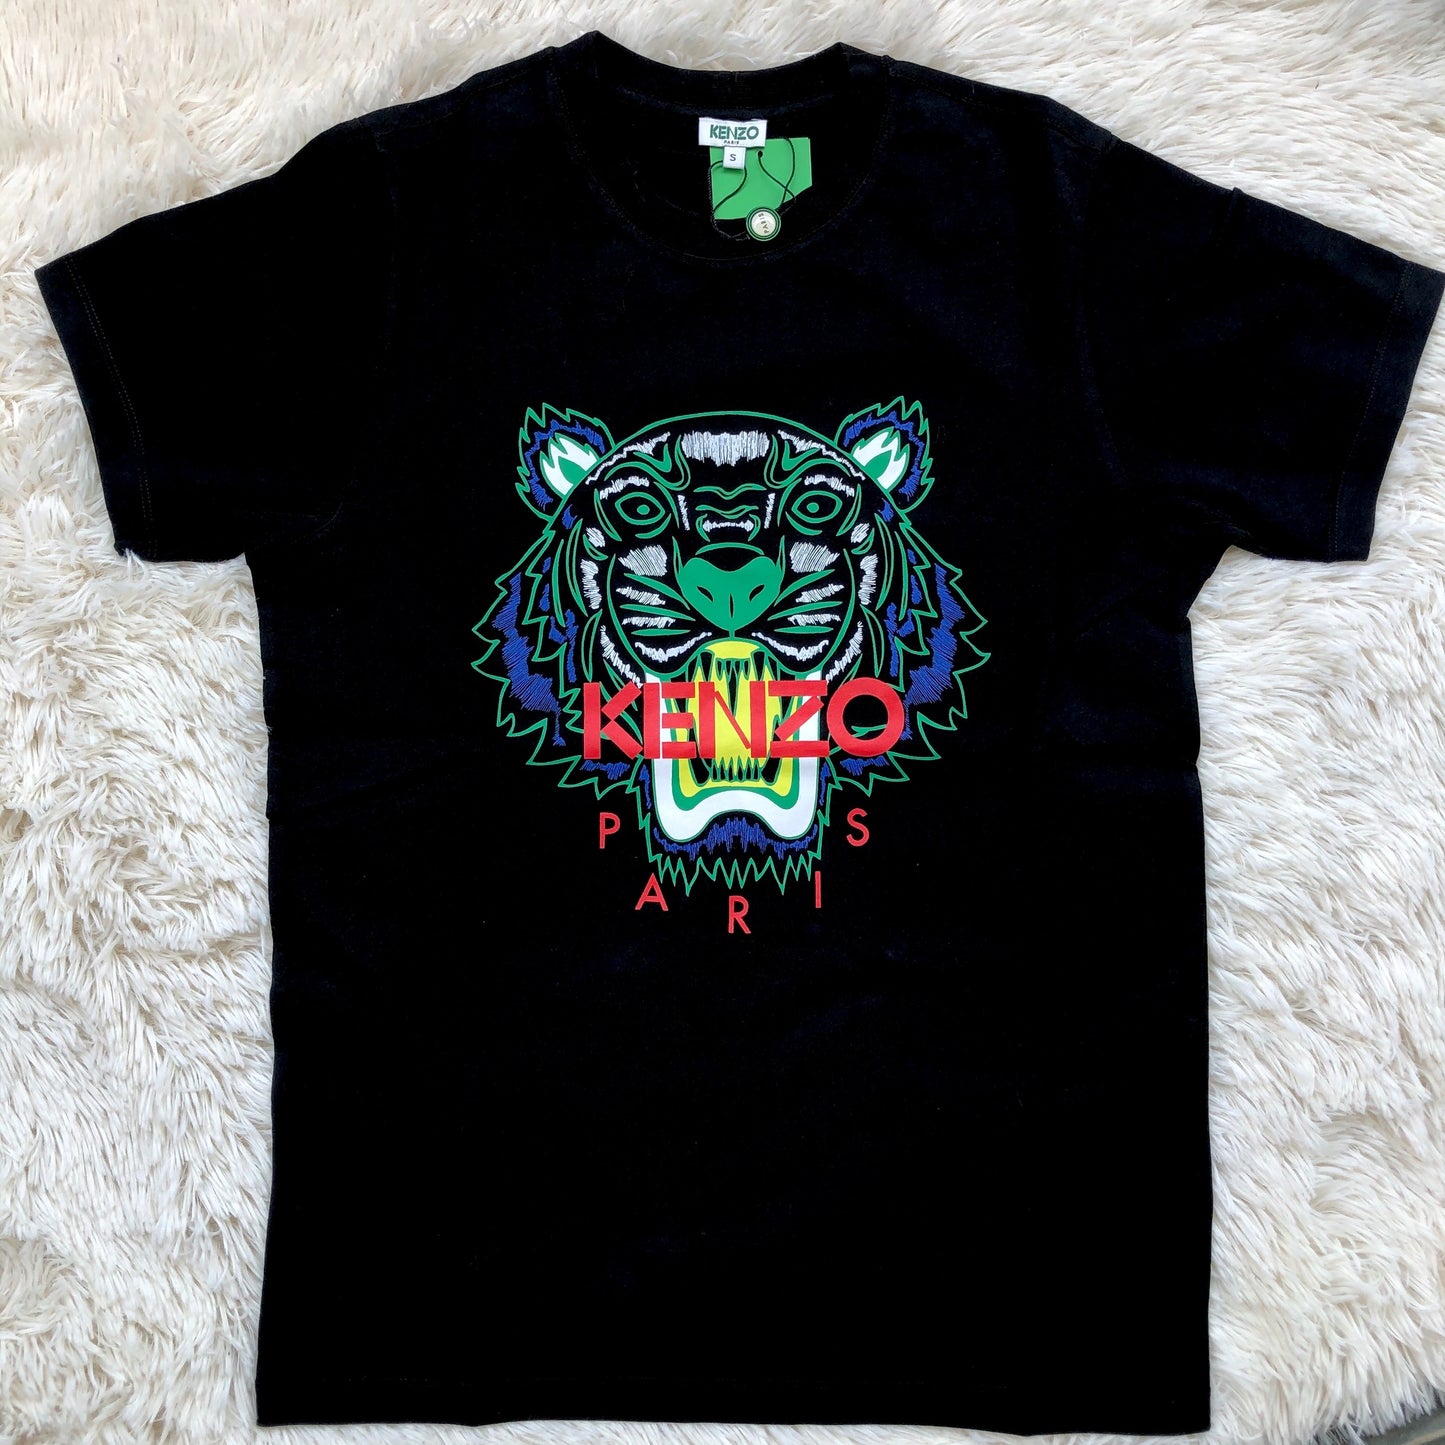 Kenzo Green Tiger Logo T-Shirt - Shop Streetwear, Sneakers, Slippers and Gifts online | Malaysia - The Factory KL